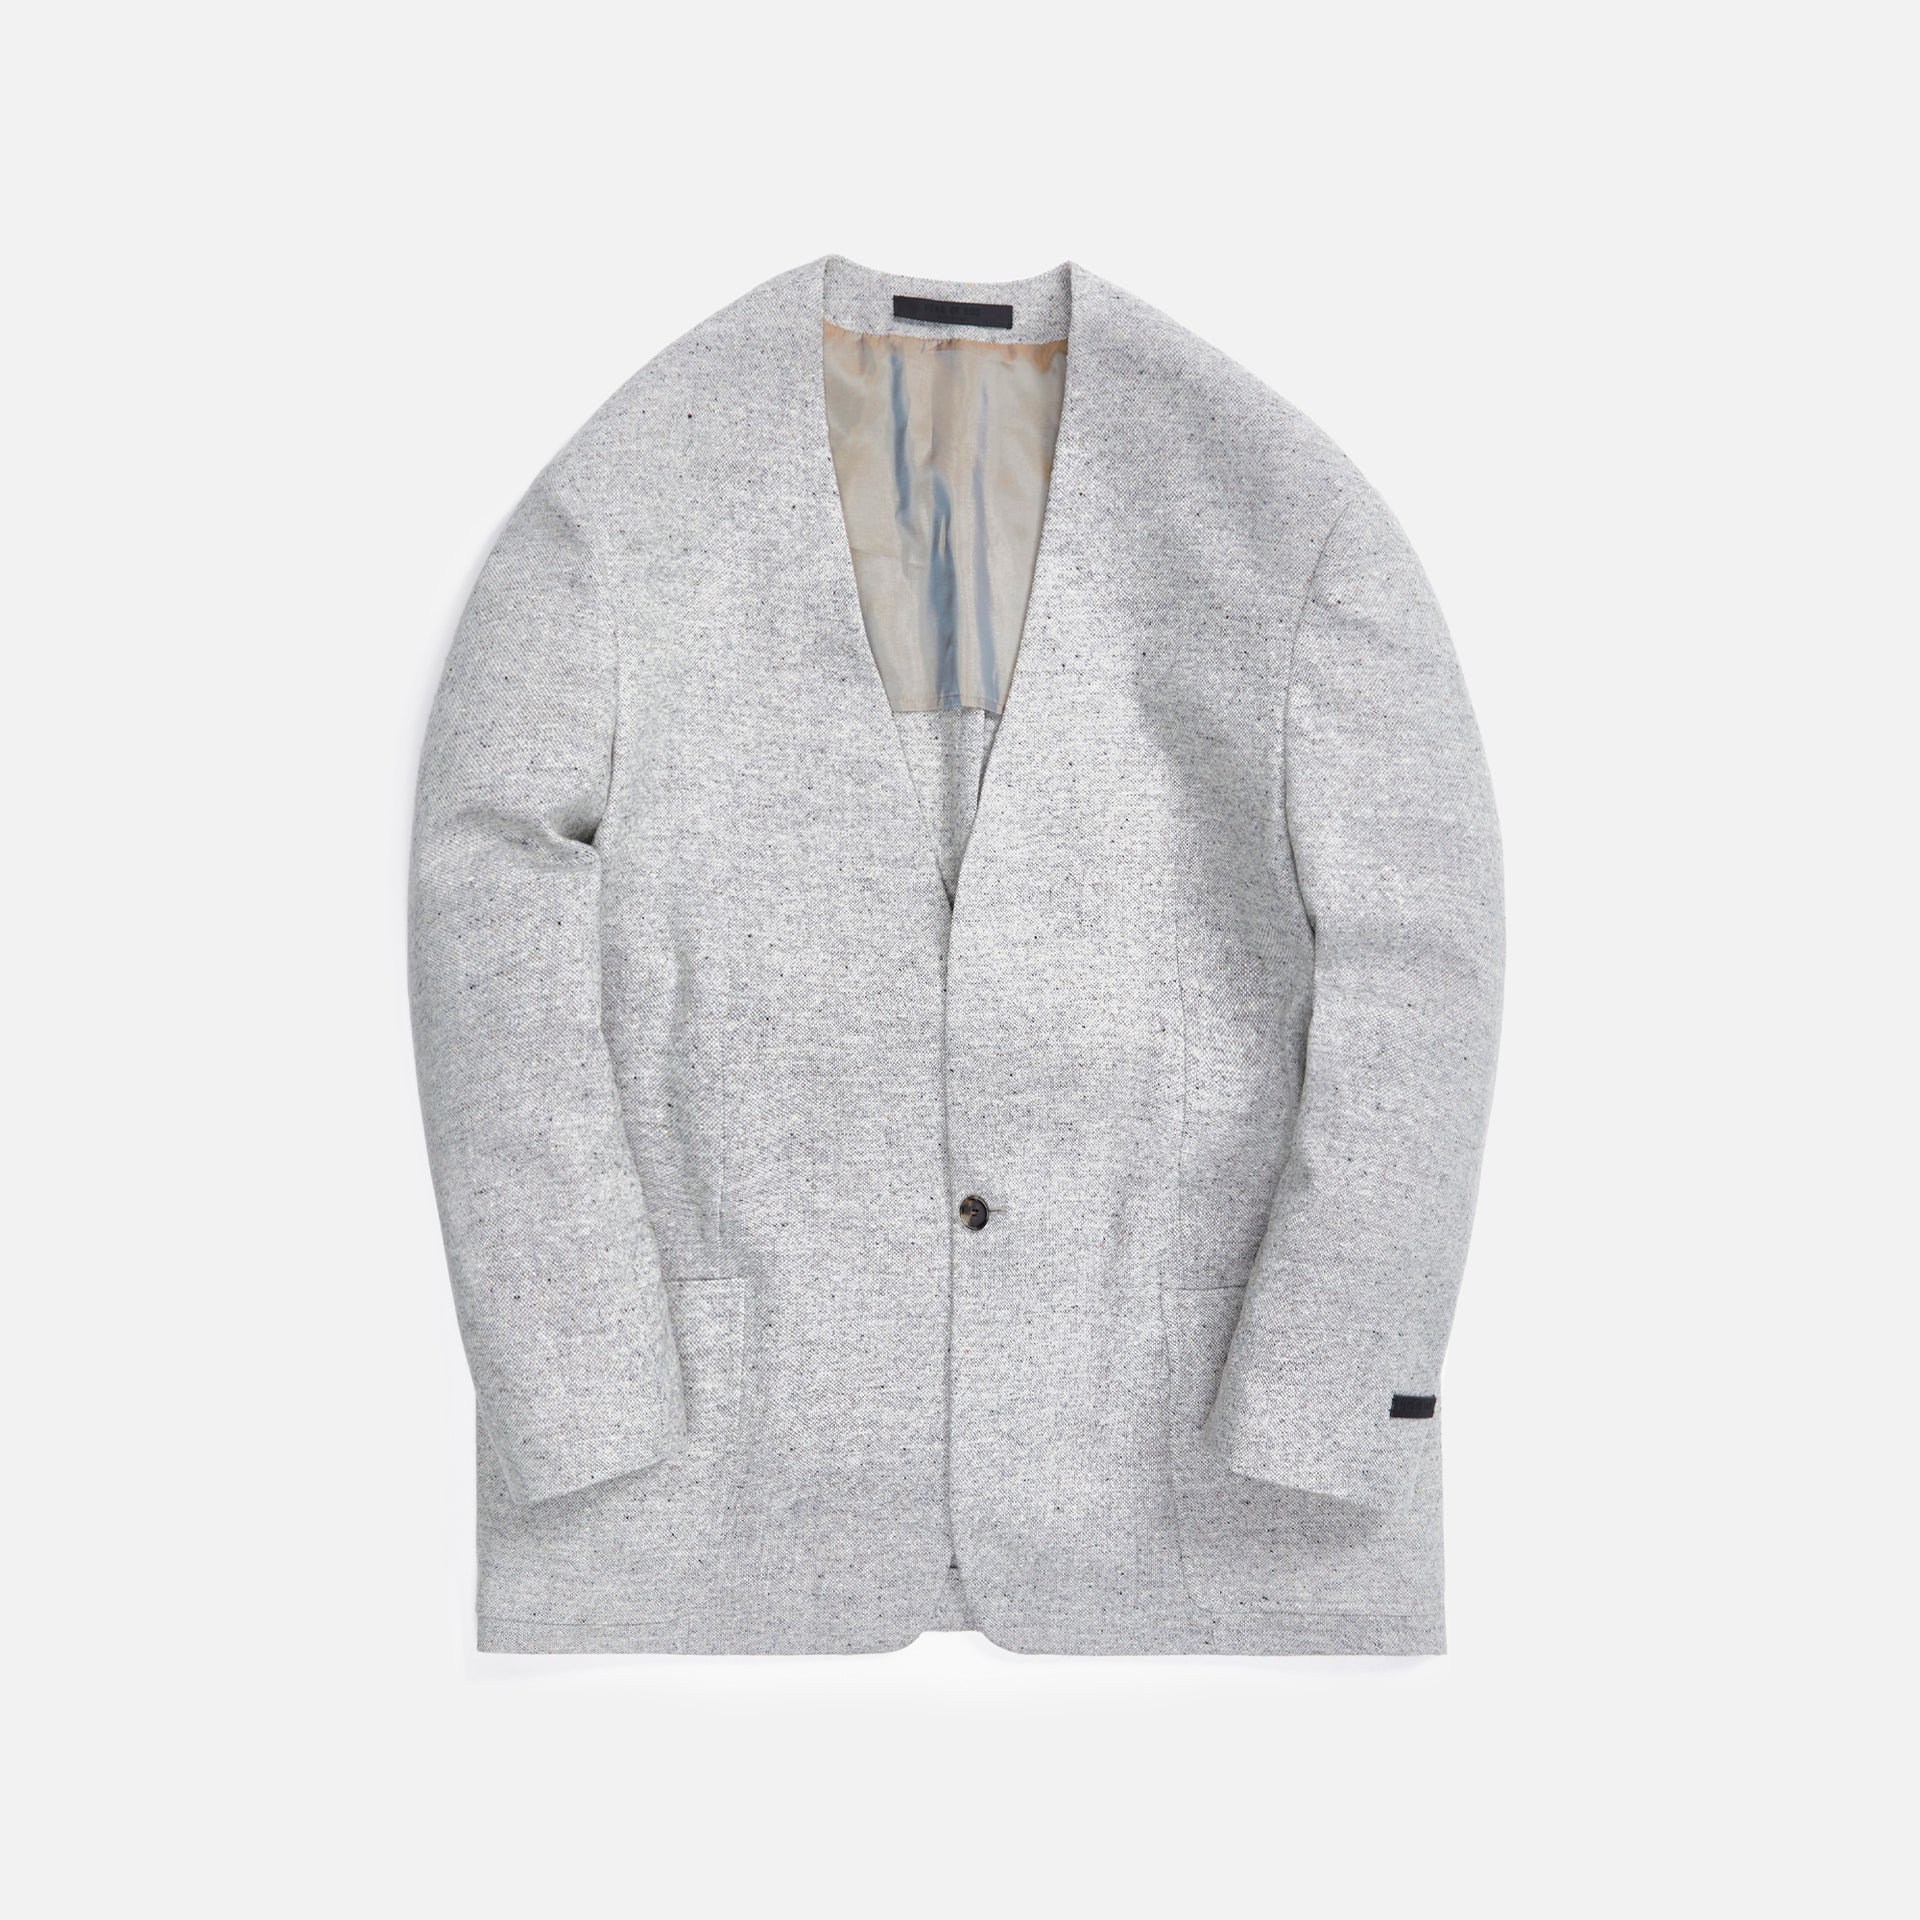 Fear of God The Everyday Sportcoat - Grey